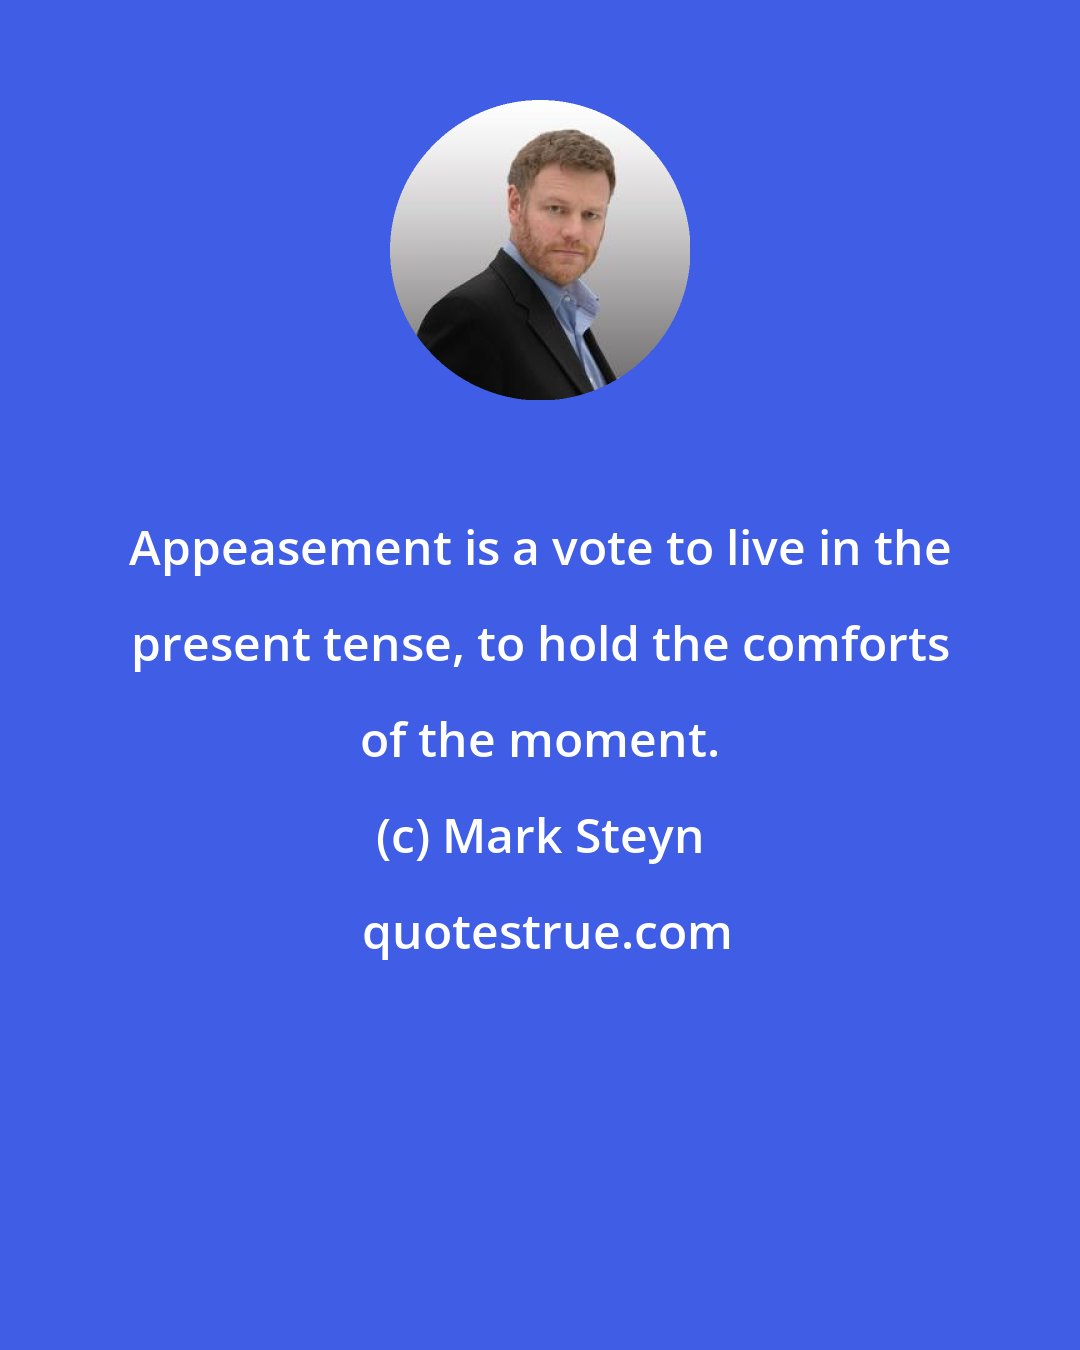 Mark Steyn: Appeasement is a vote to live in the present tense, to hold the comforts of the moment.